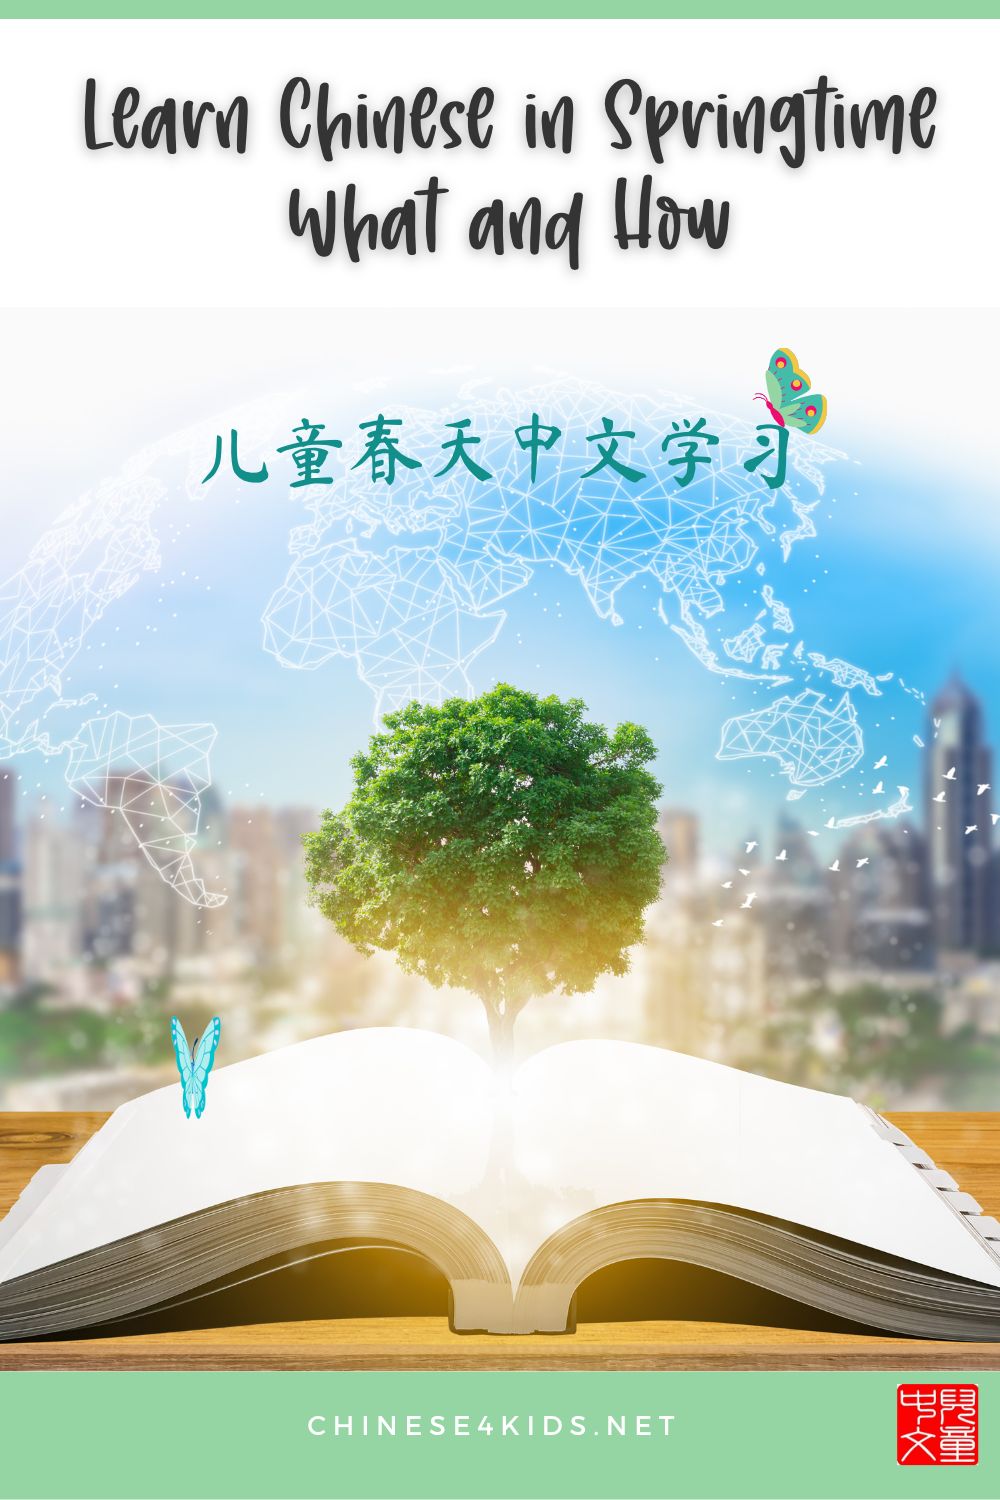 What Chinese to learn for Spring with various Chinese learning materials #Chinese4kids #SpringinChinese #Spring #LearnChinese #Chineselearning